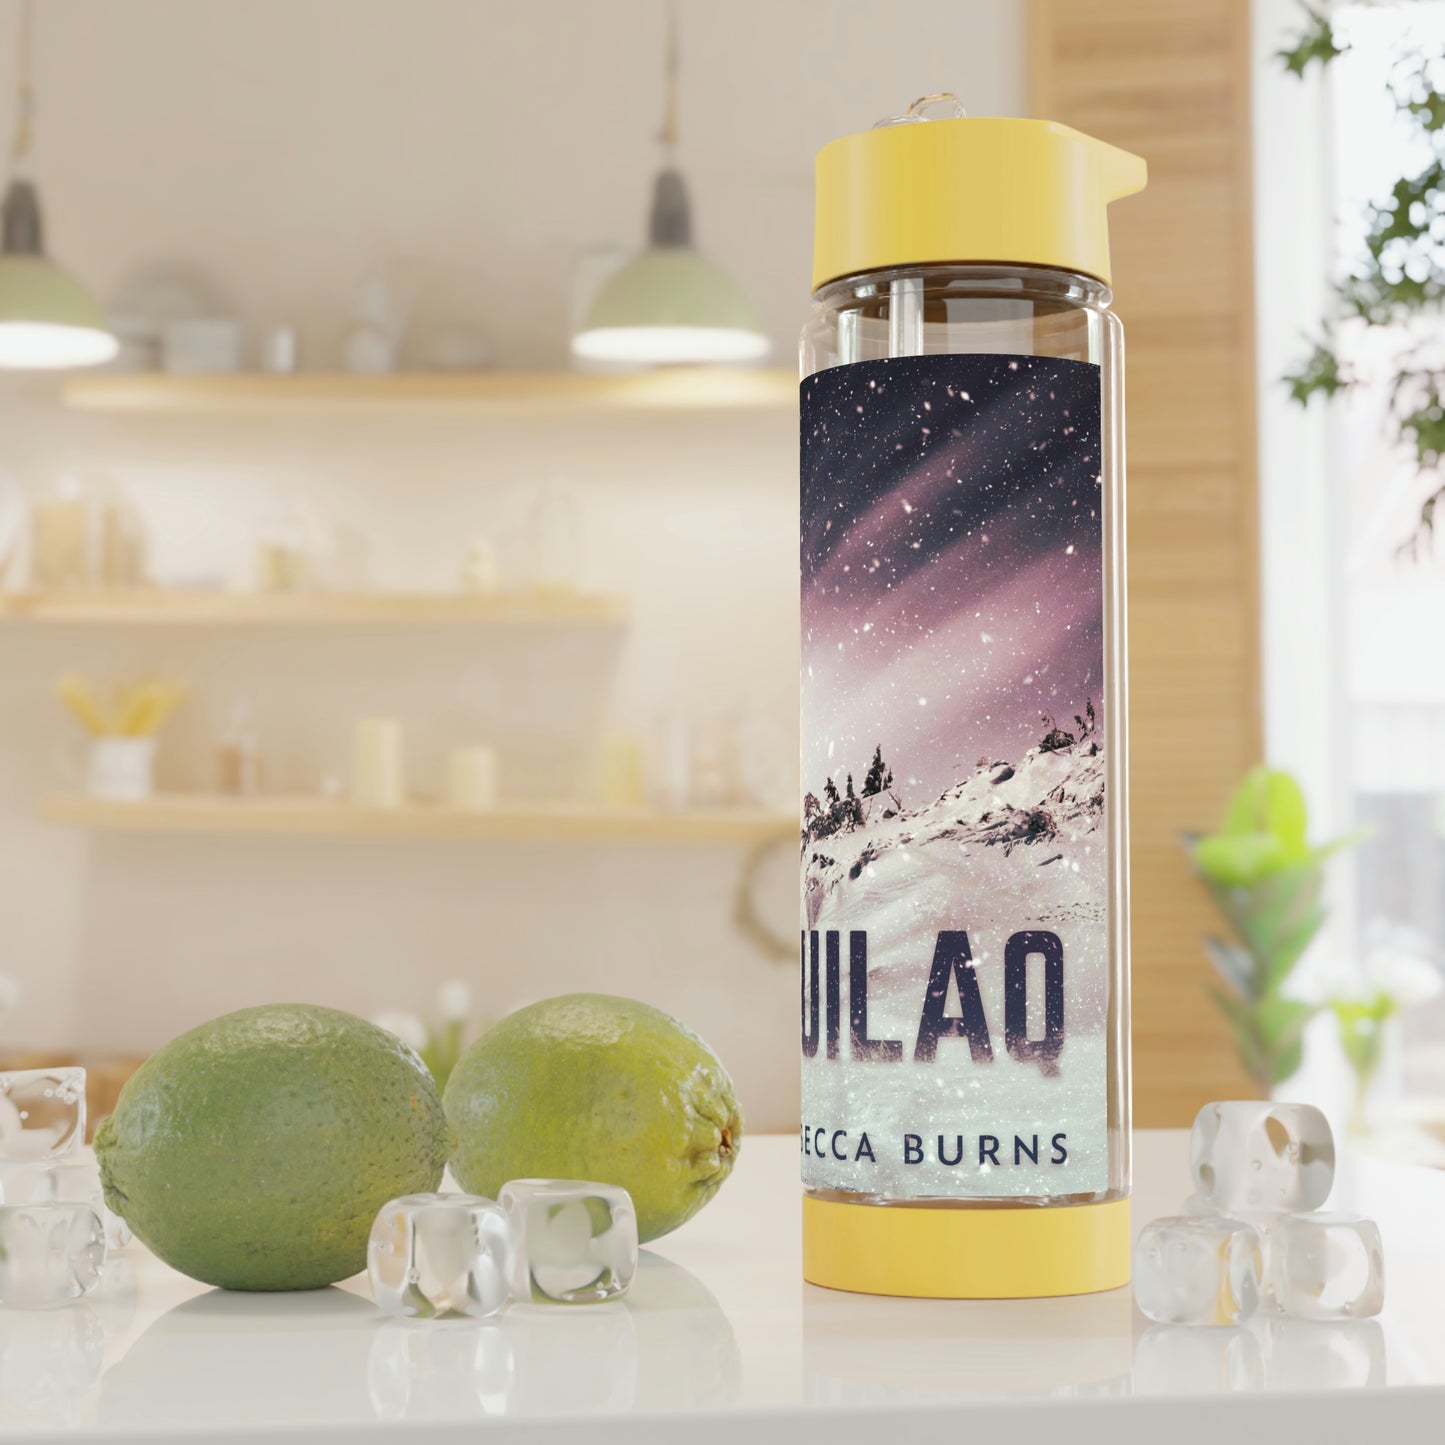 Quilaq - Infuser Water Bottle